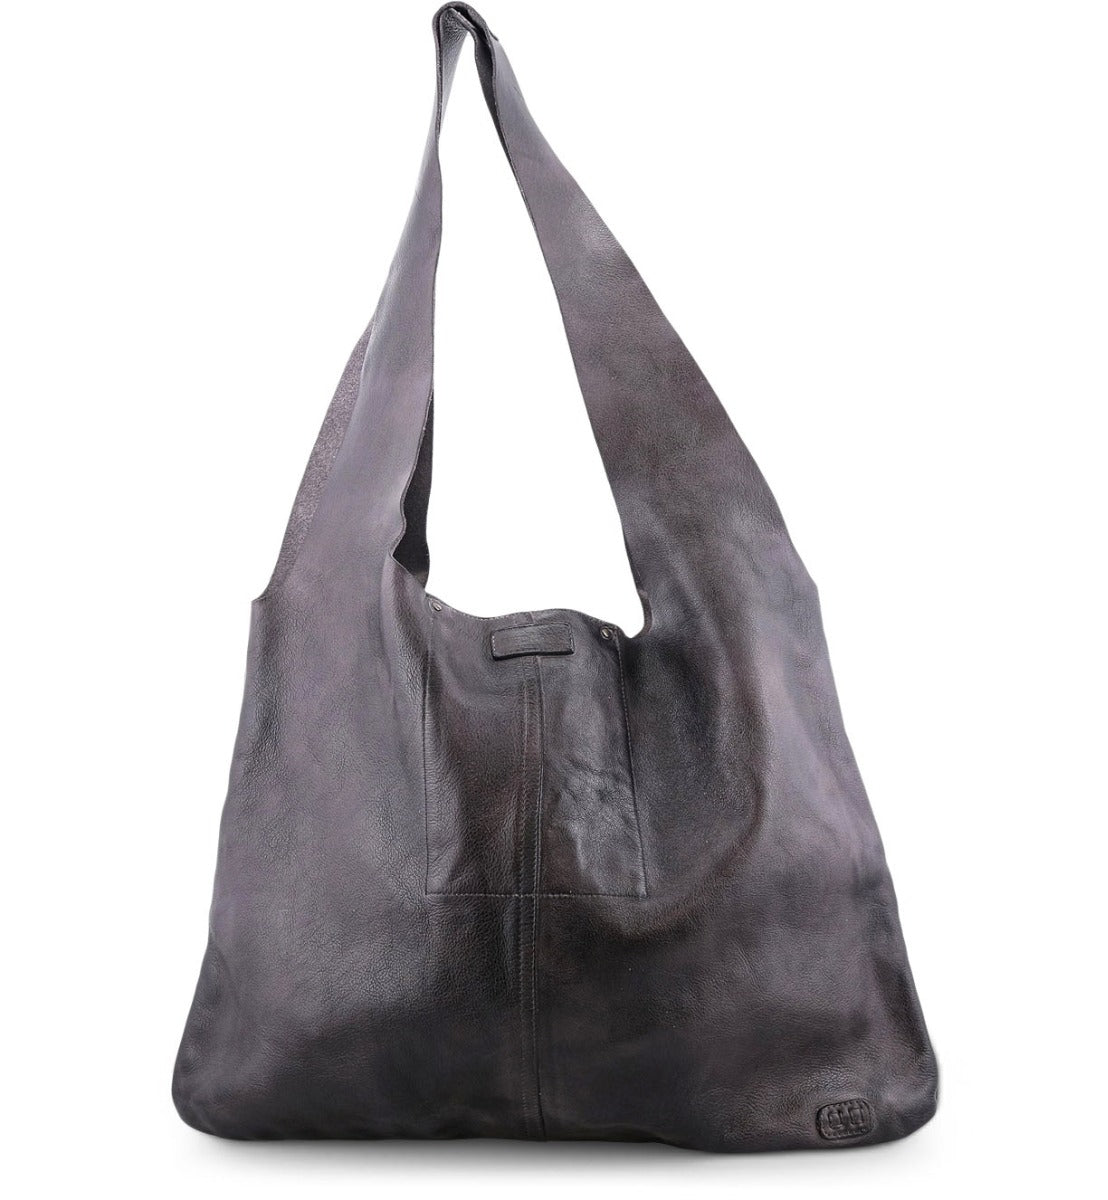 A black leather Ariel hobo bag with two handles, from the brand Bed Stu.